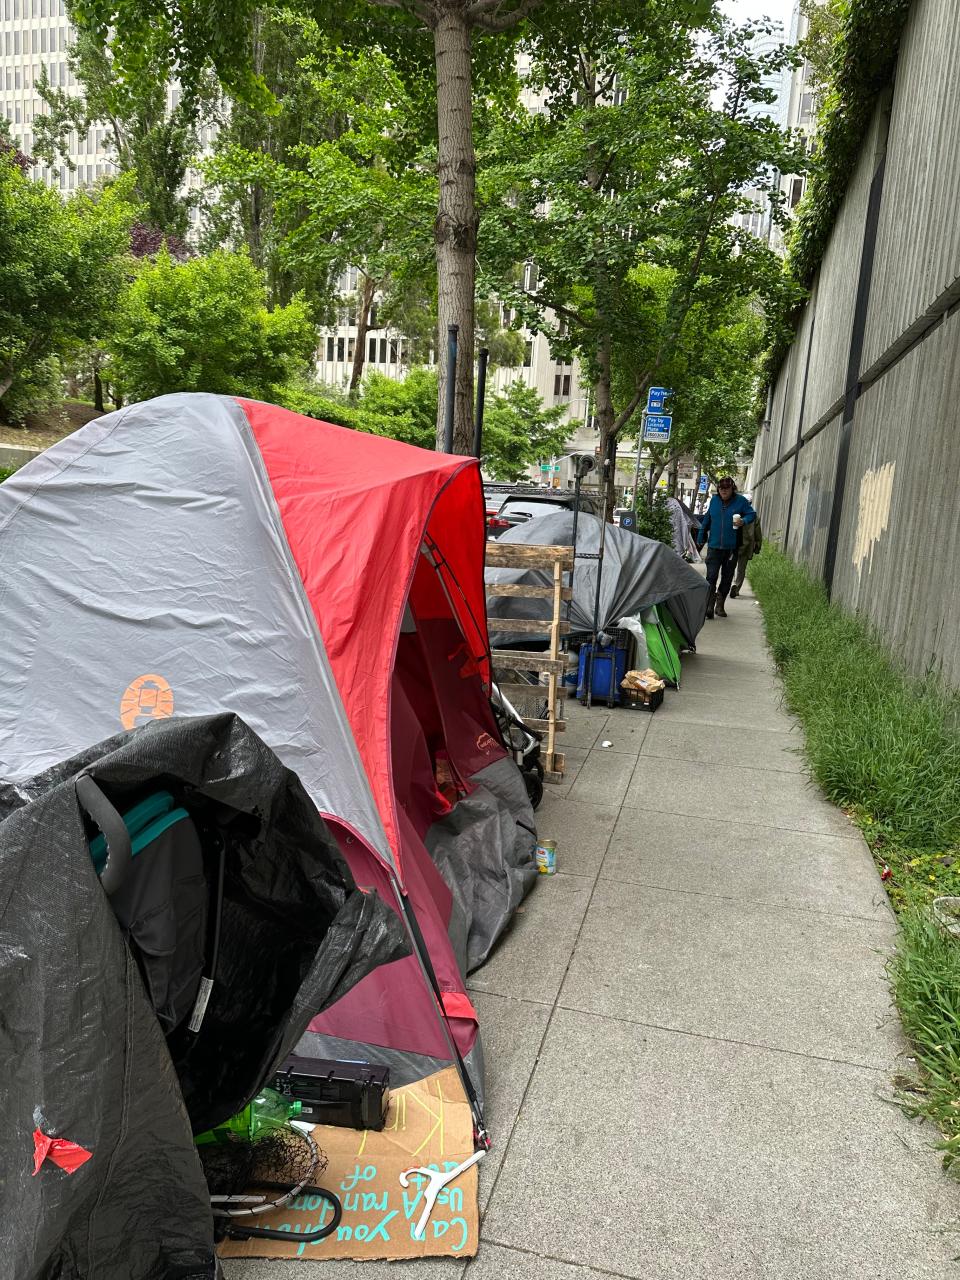 A tent city in San Francisco